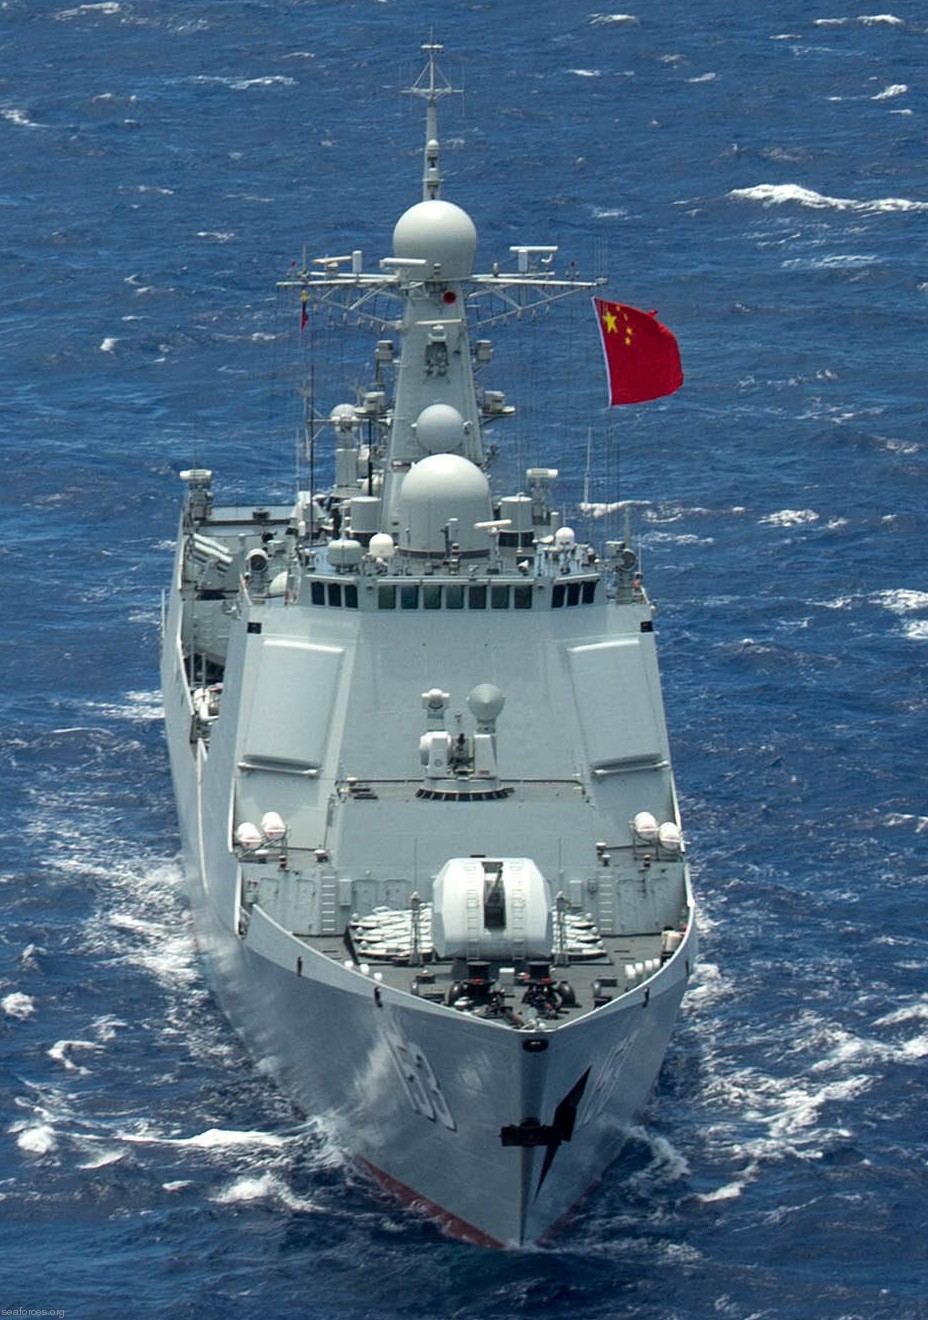 ddg-153 plans xian type 052c class guided missile destroyer china people's liberation army navy 10